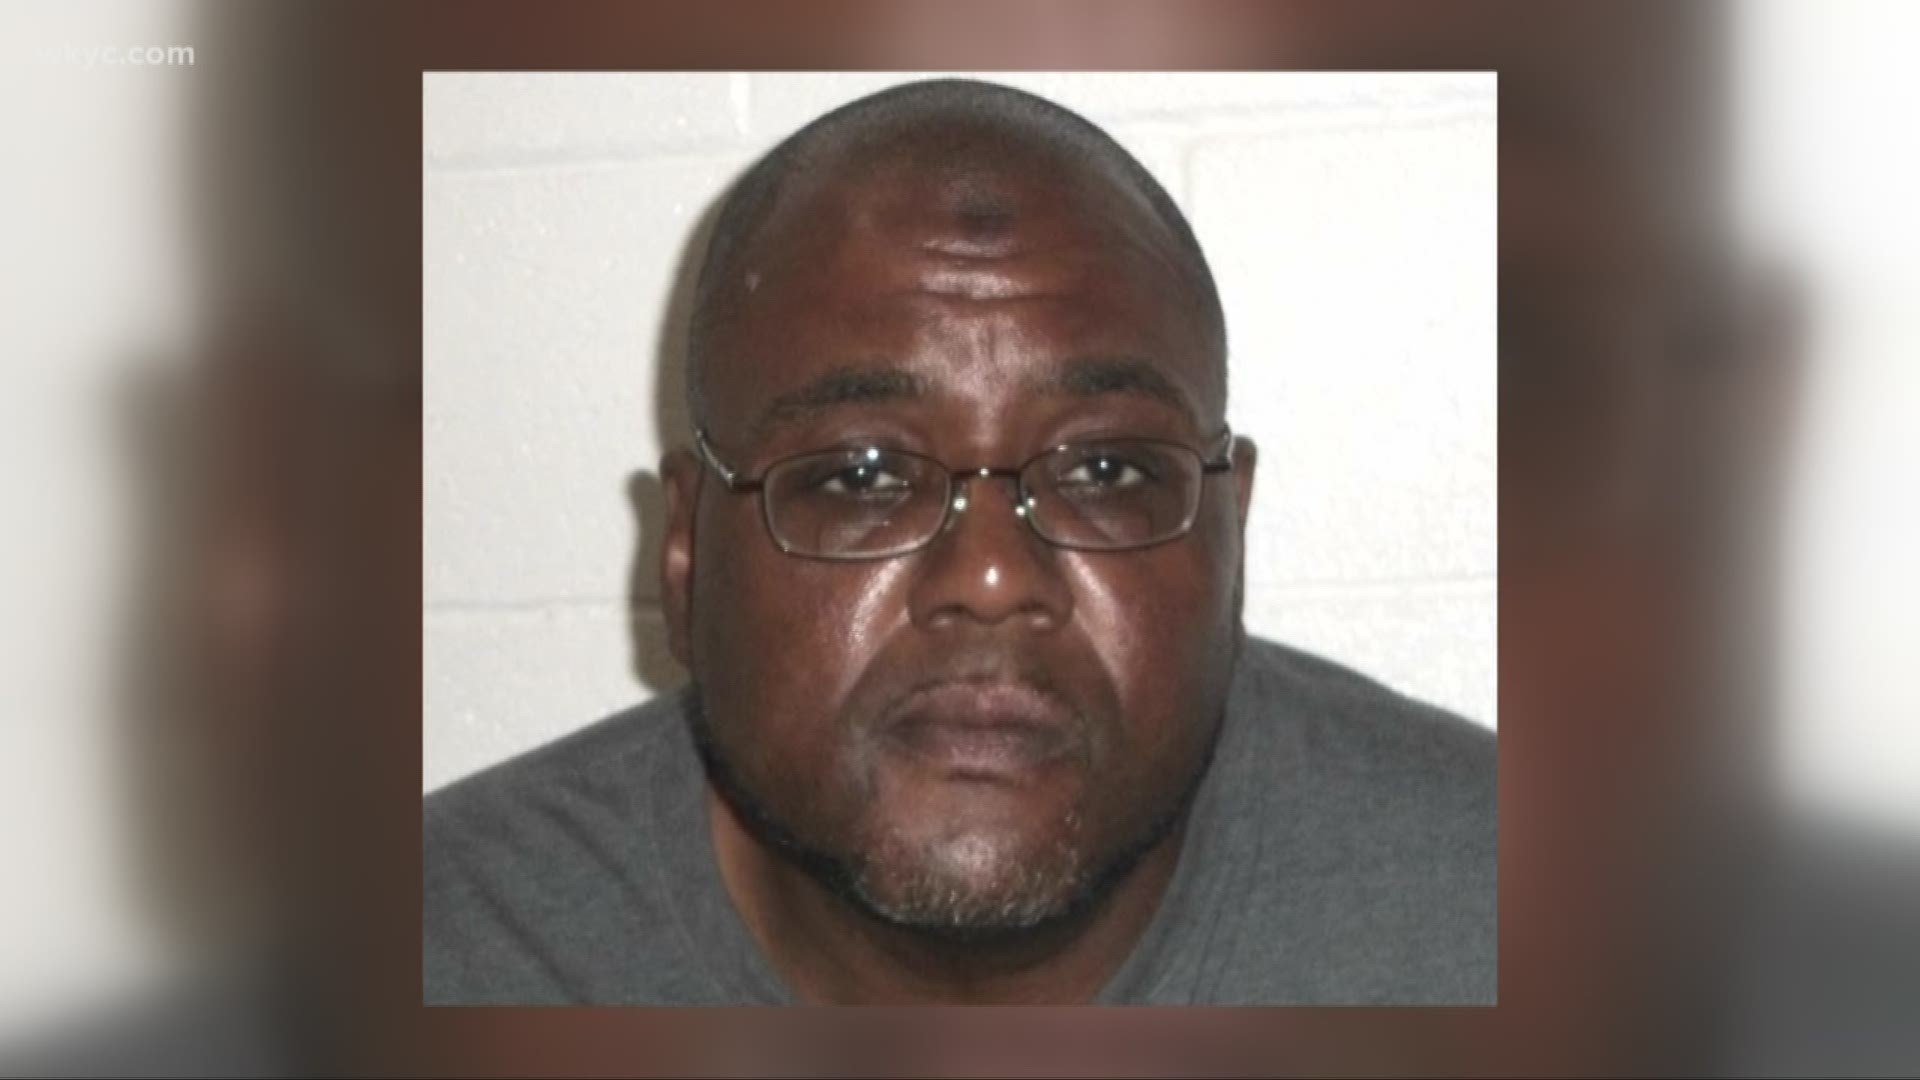 Feb. 13, 2019: The man who was arrested last summer for allegedly plotting a terrorist attack in Cleveland on July 4 is now facing new charges. Authorities say Demetrius Nathaniel Pitts allegedly made threats against President Trump and his family.